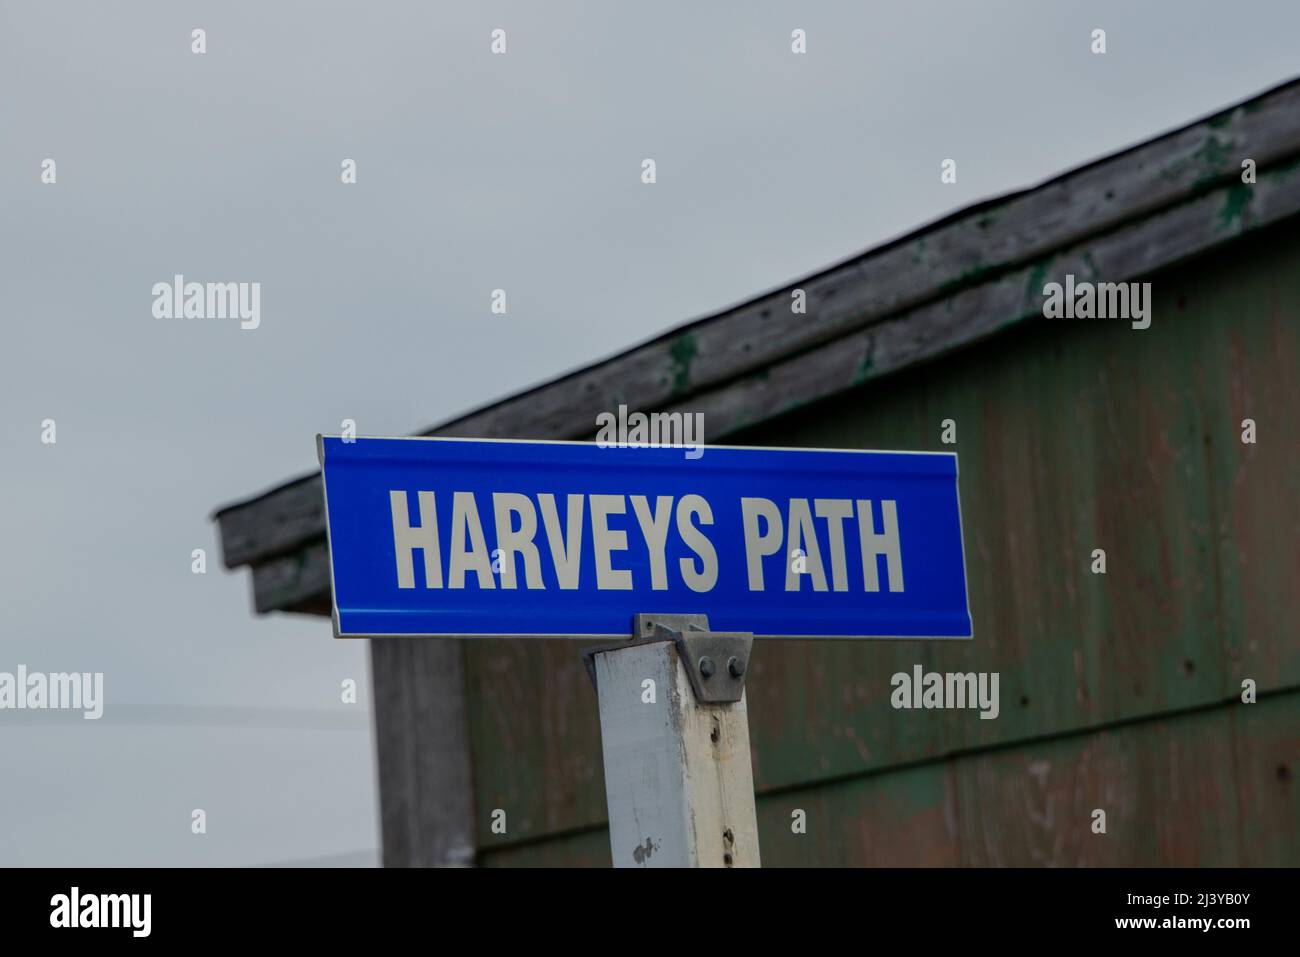 A blue metal street name sign is attached to a white square wooden post. The white text on the sign spells Harvey's Path in capital letters. Stock Photo